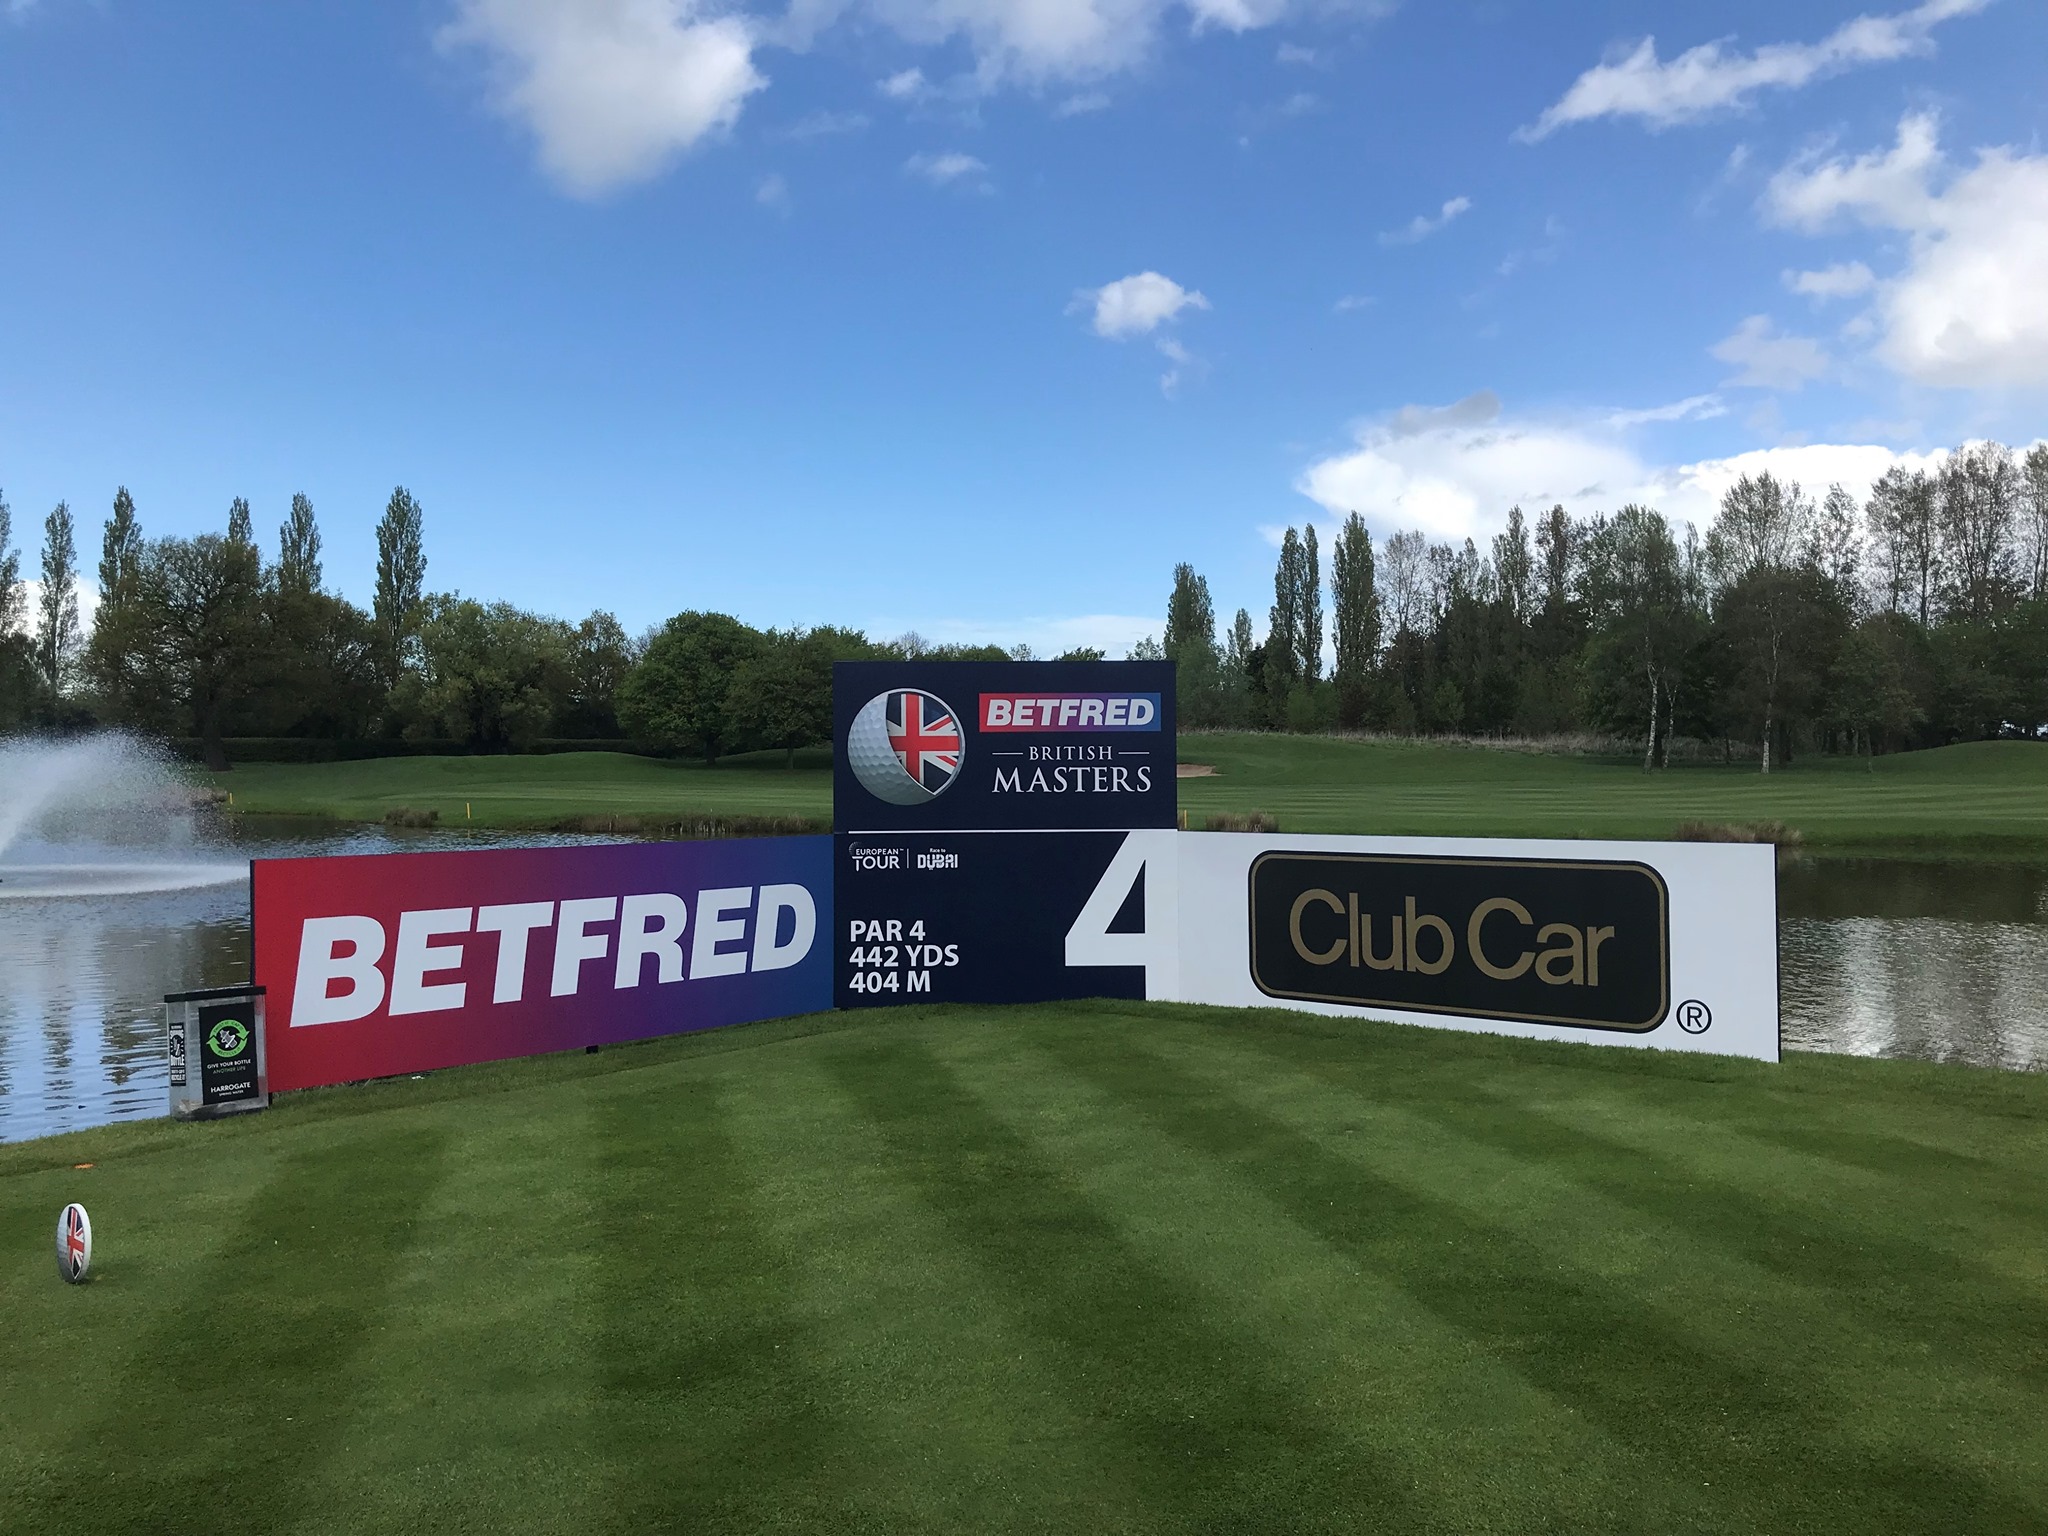 Betfred British Masters hosted by Danny Willett